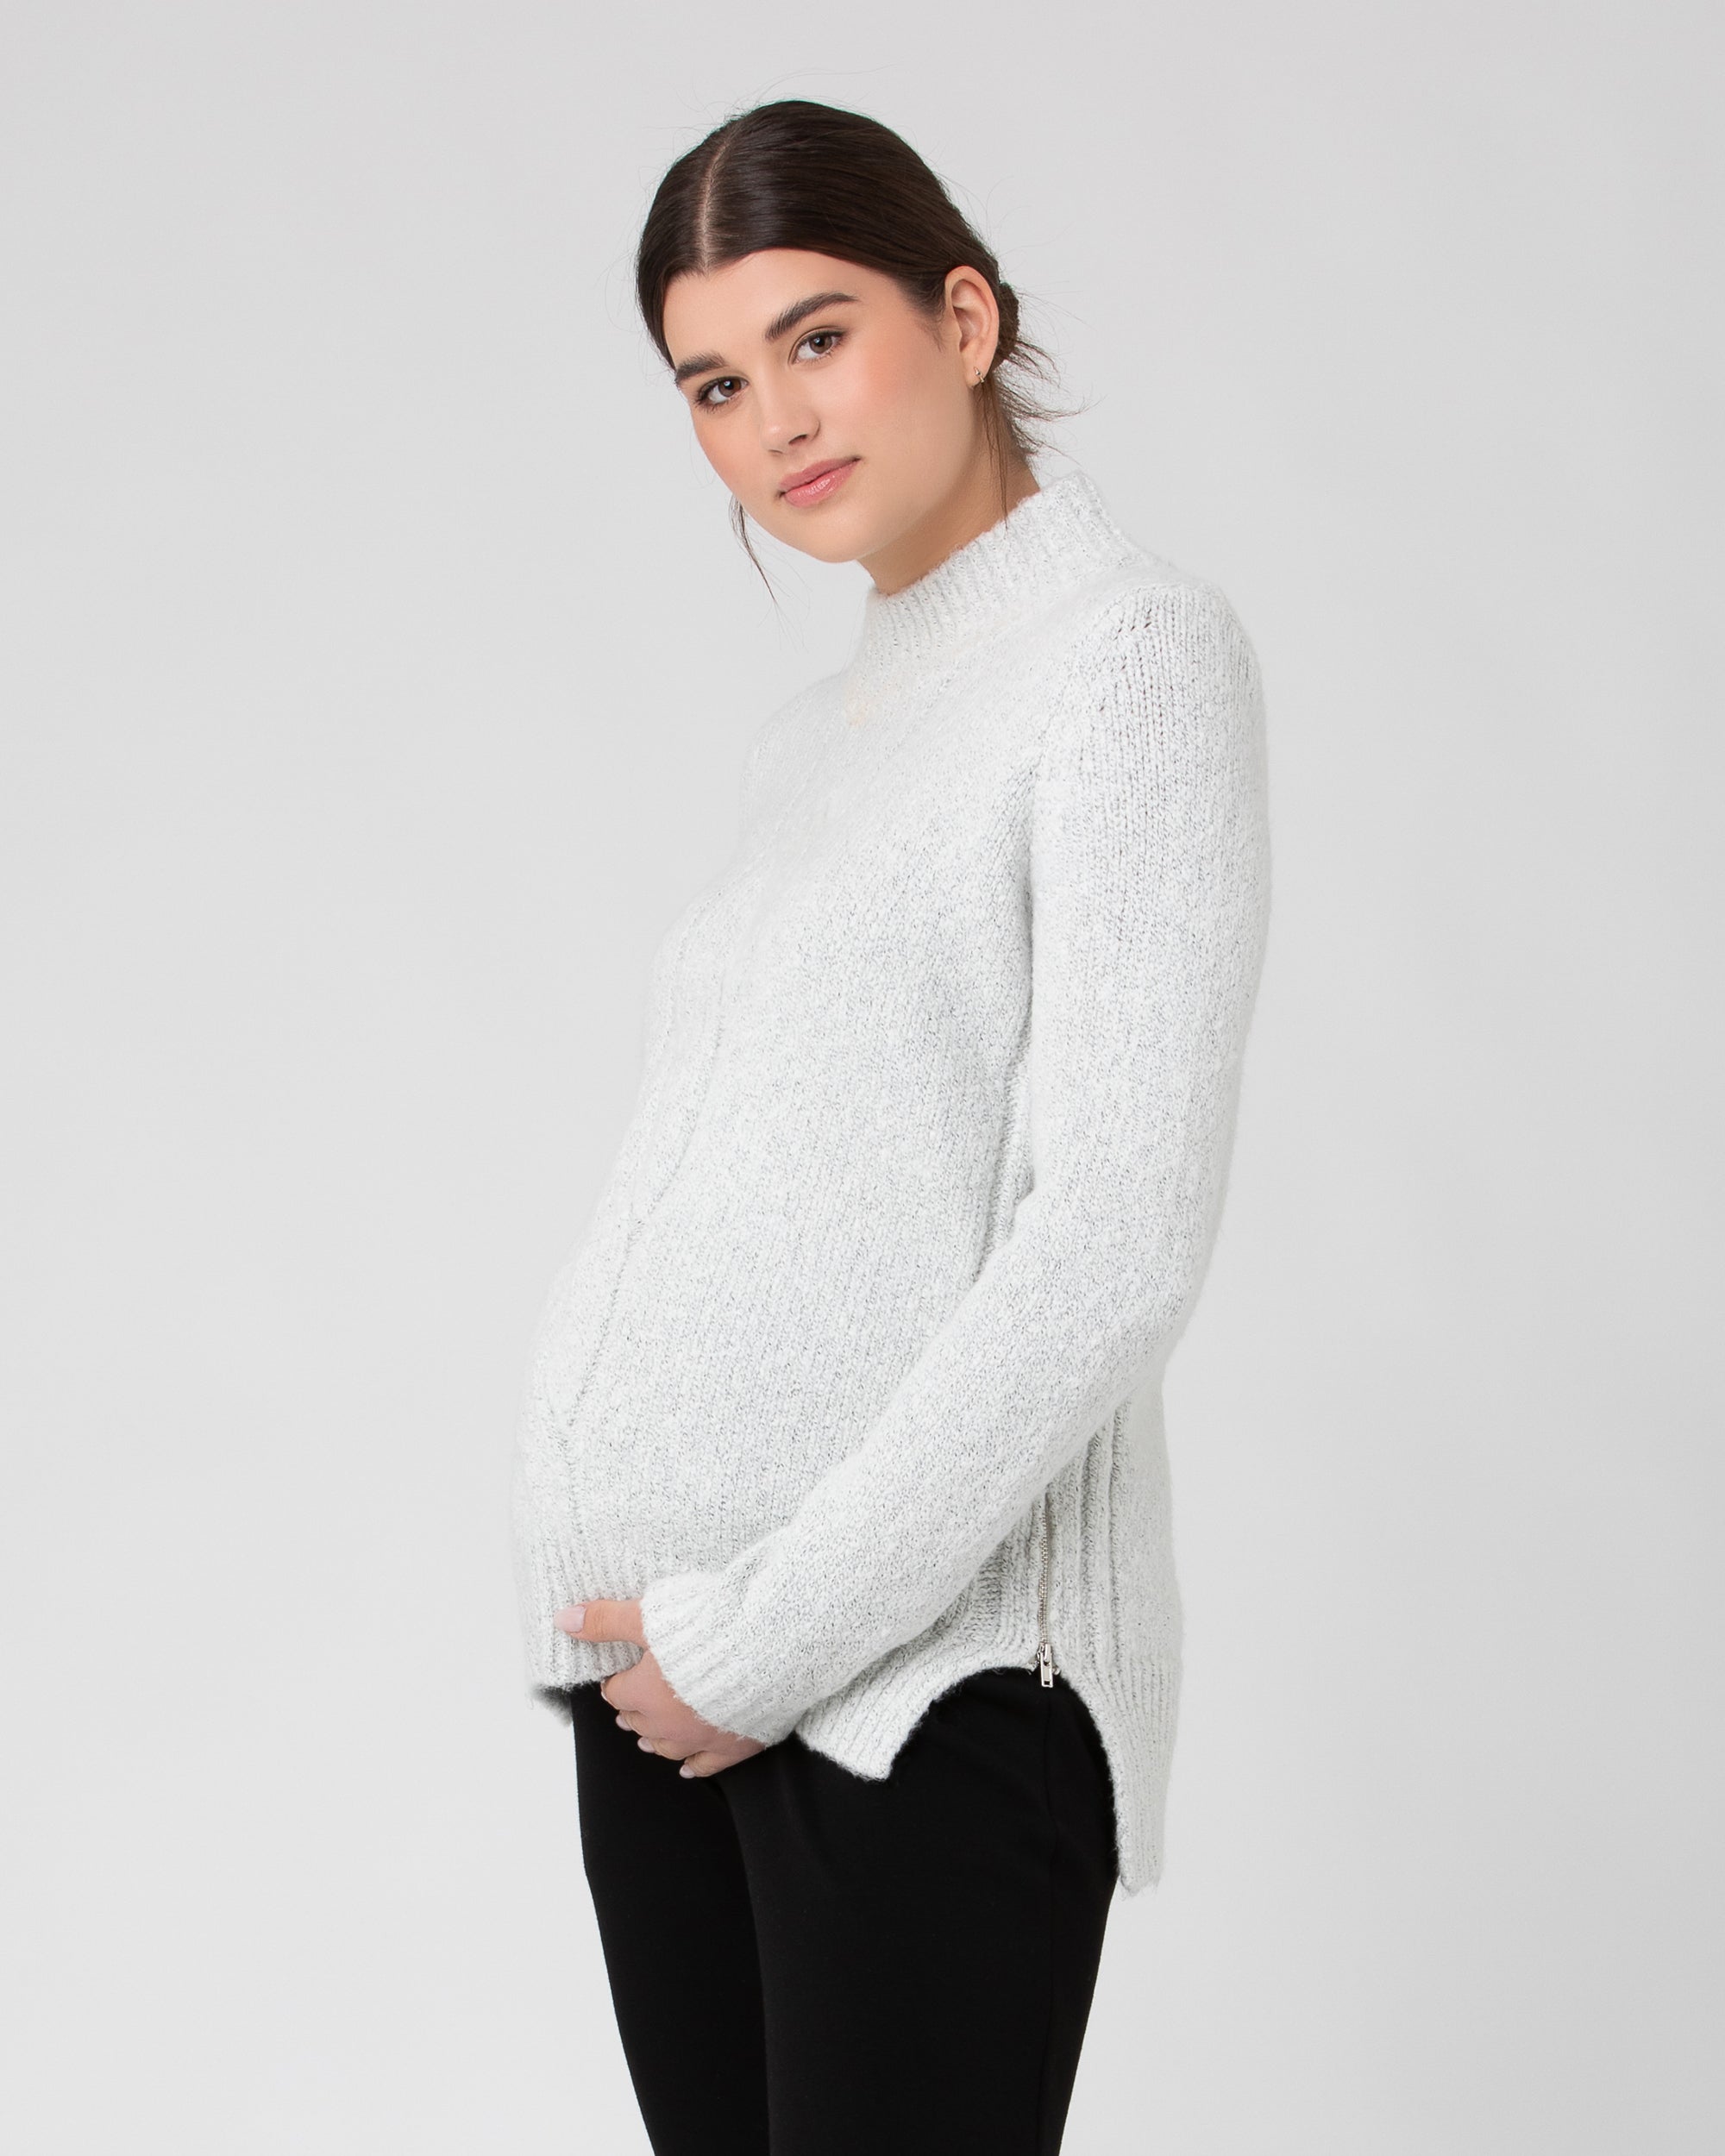 Seraphine Powder Blue Cable Knit Maternity & Nursing Sweater